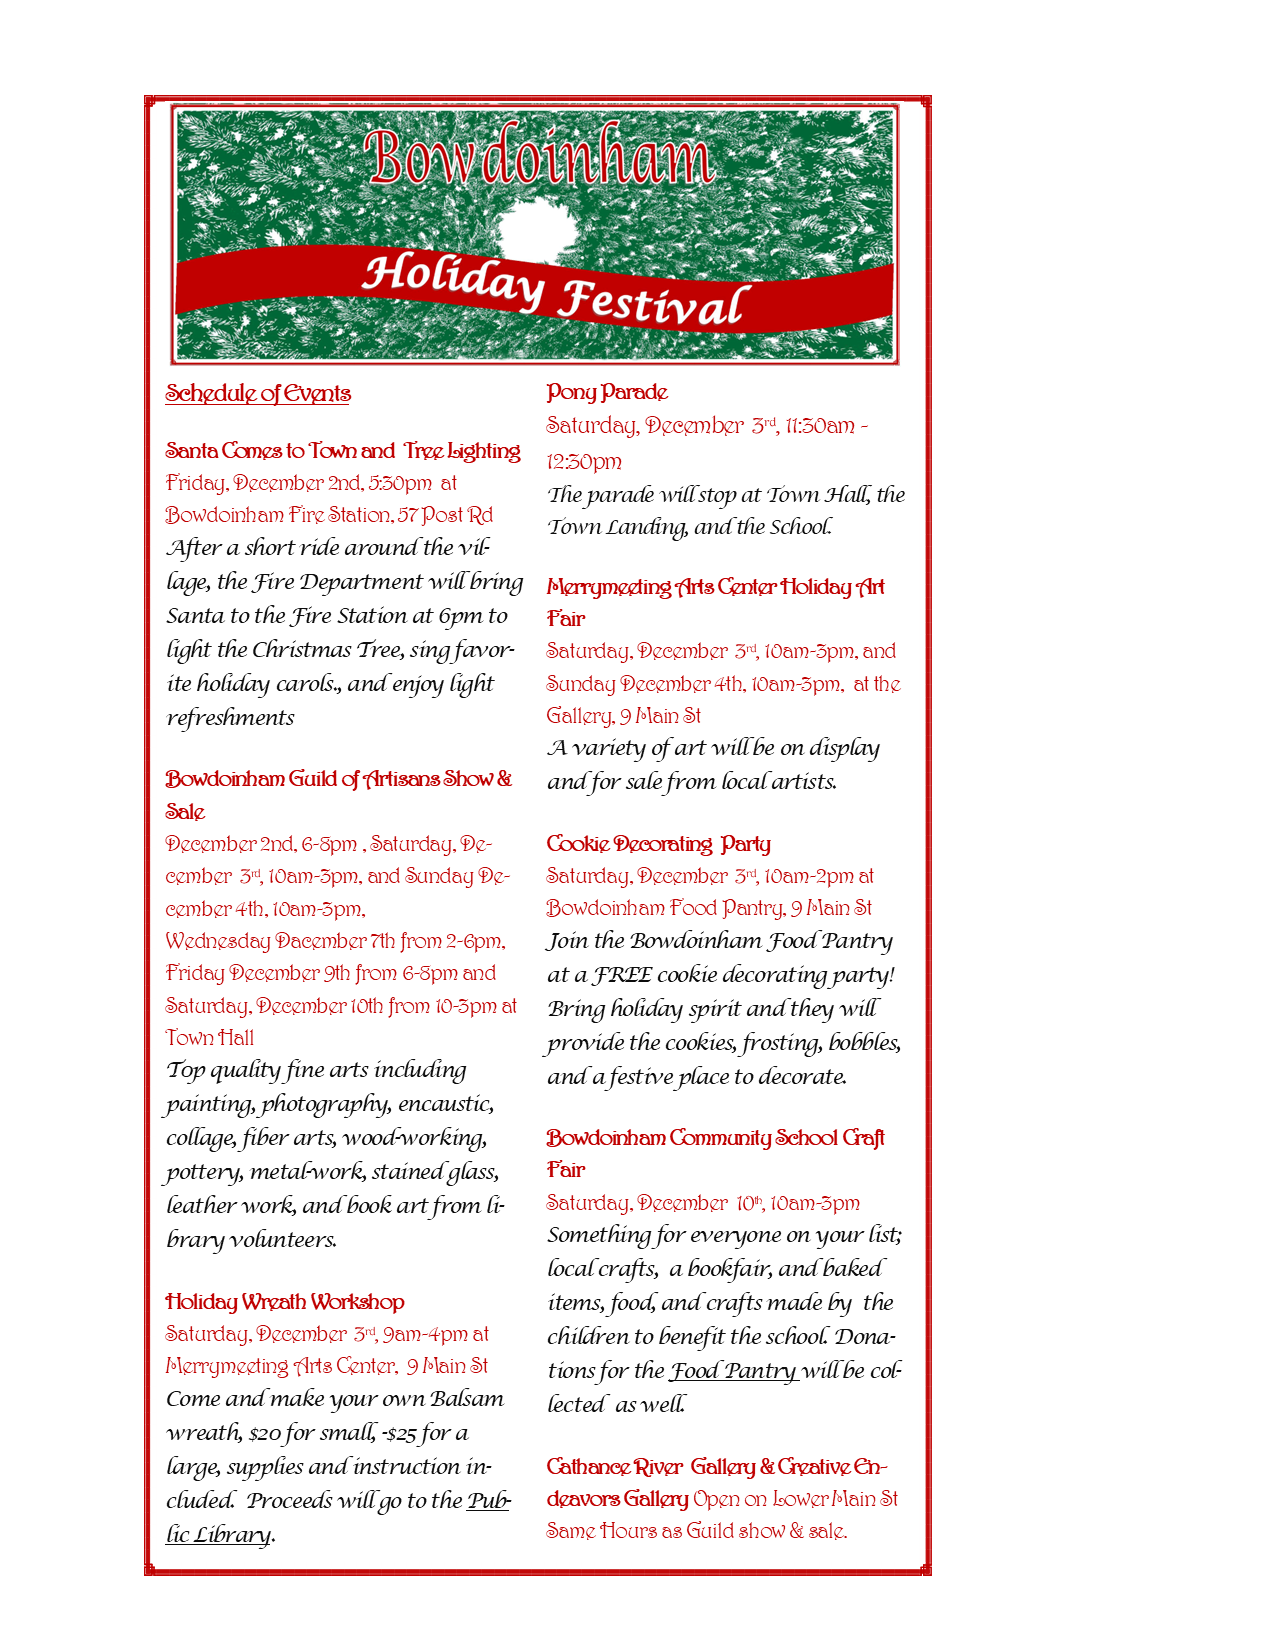 Holiday Fest Schedule